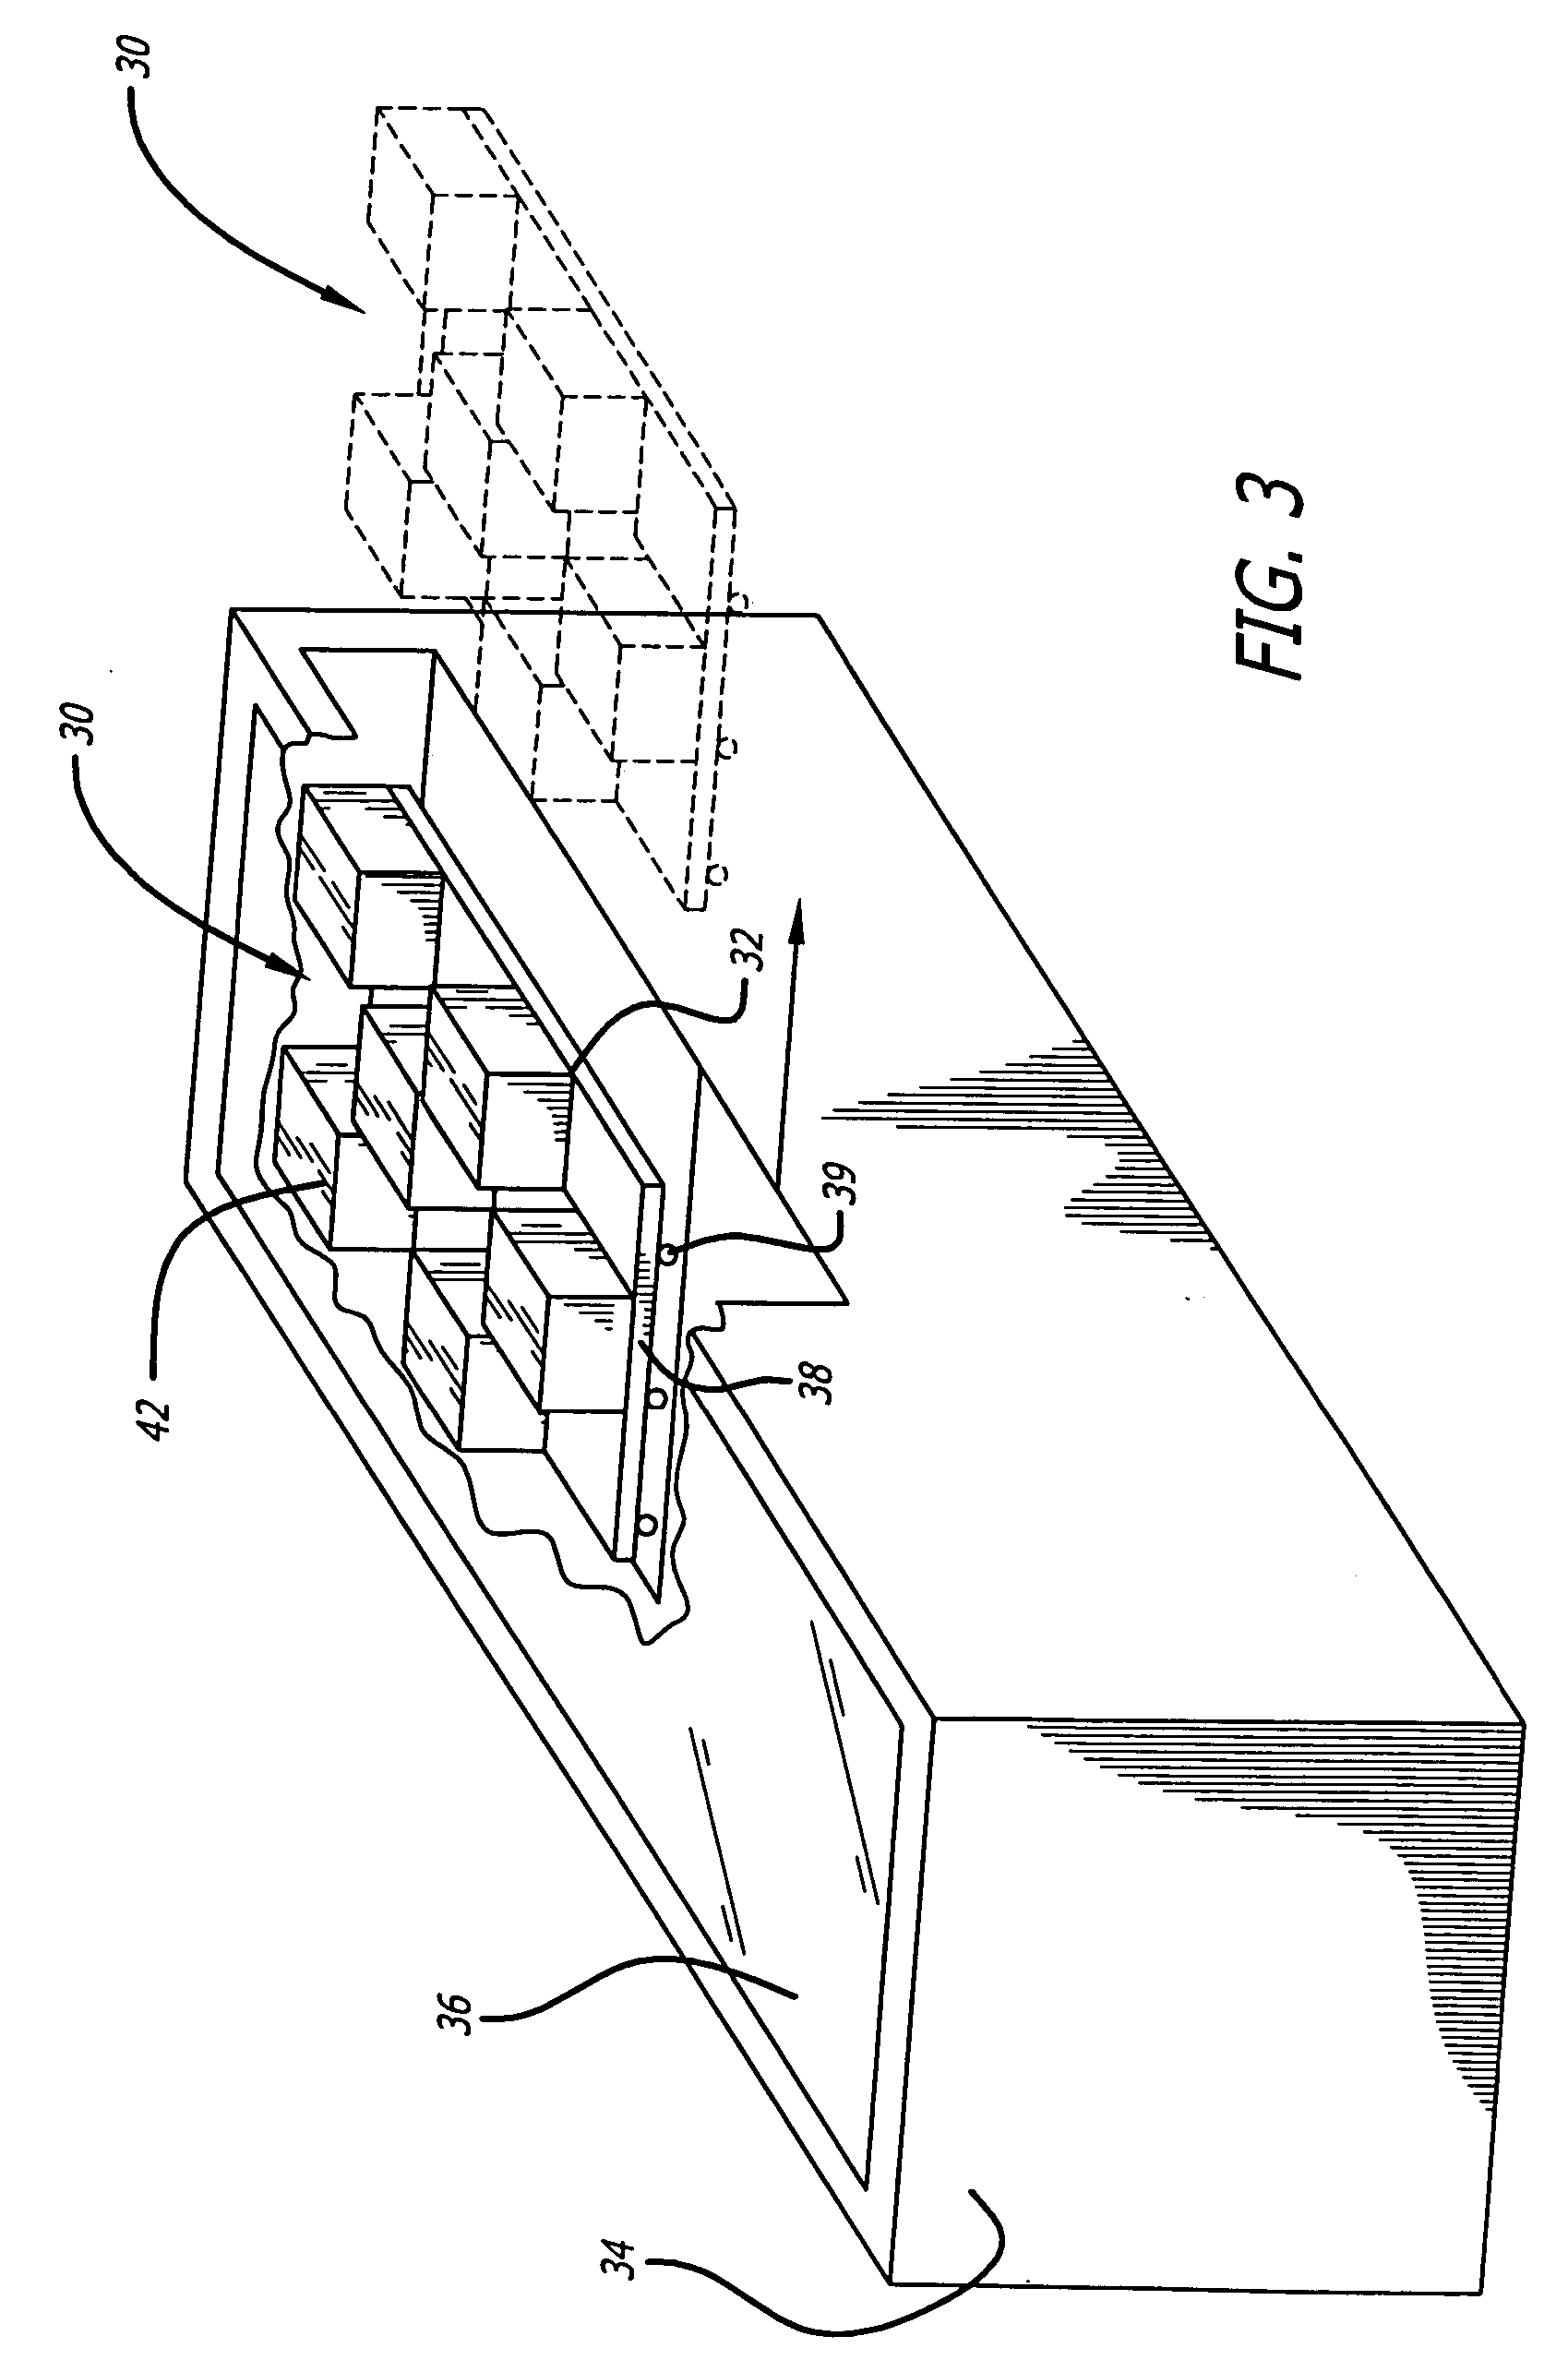 System and method for displaying self-winding watches